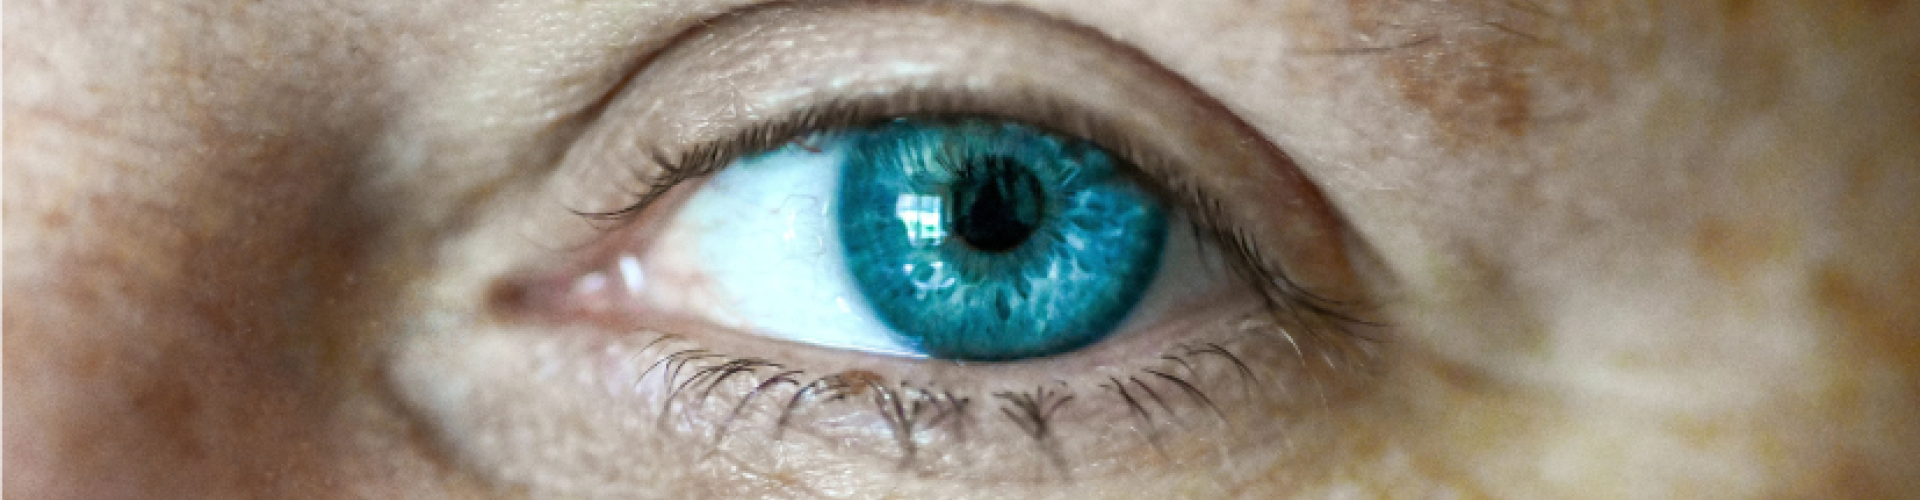 close-up of the blue eye